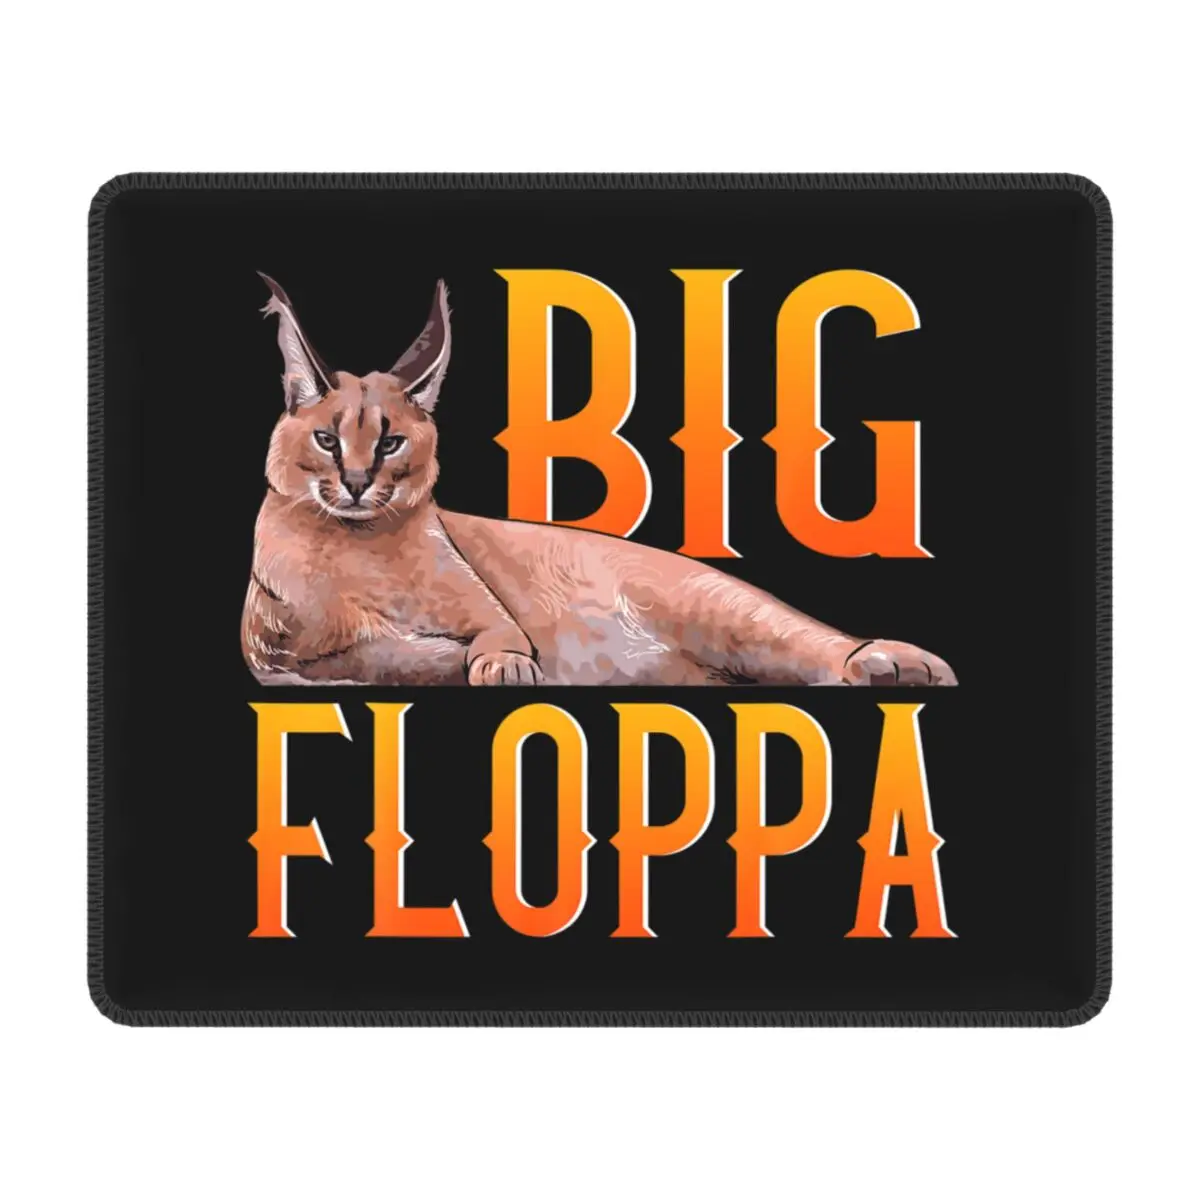 

Big Floppa Meme Mouse Pad Square Non-Slip Rubber Mousepad with Durable Stitched Edges for Gamer Laptop Computer PC Mouse Mat